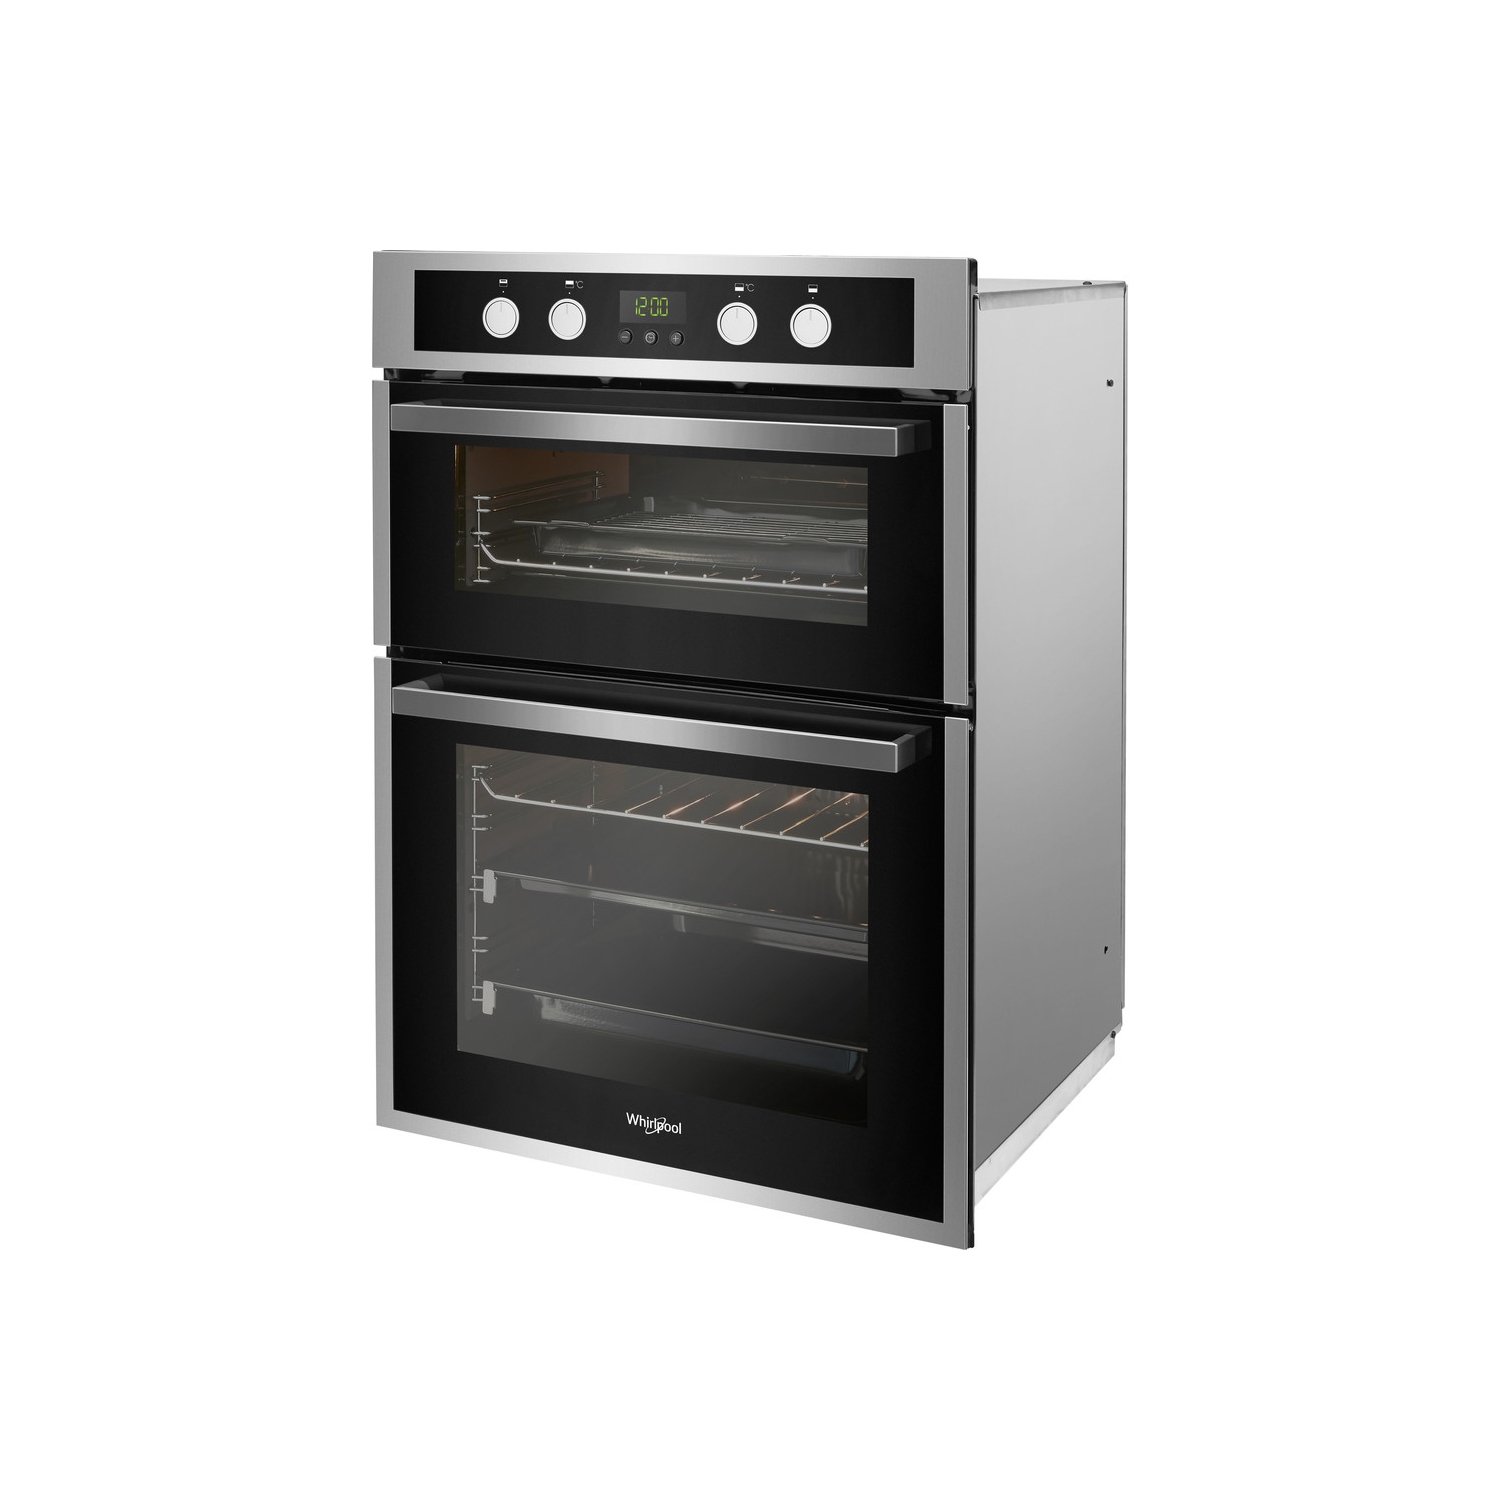 Whirlpool 60cm Built-In Electric Oven - Stainless Steel - A Rated - 9